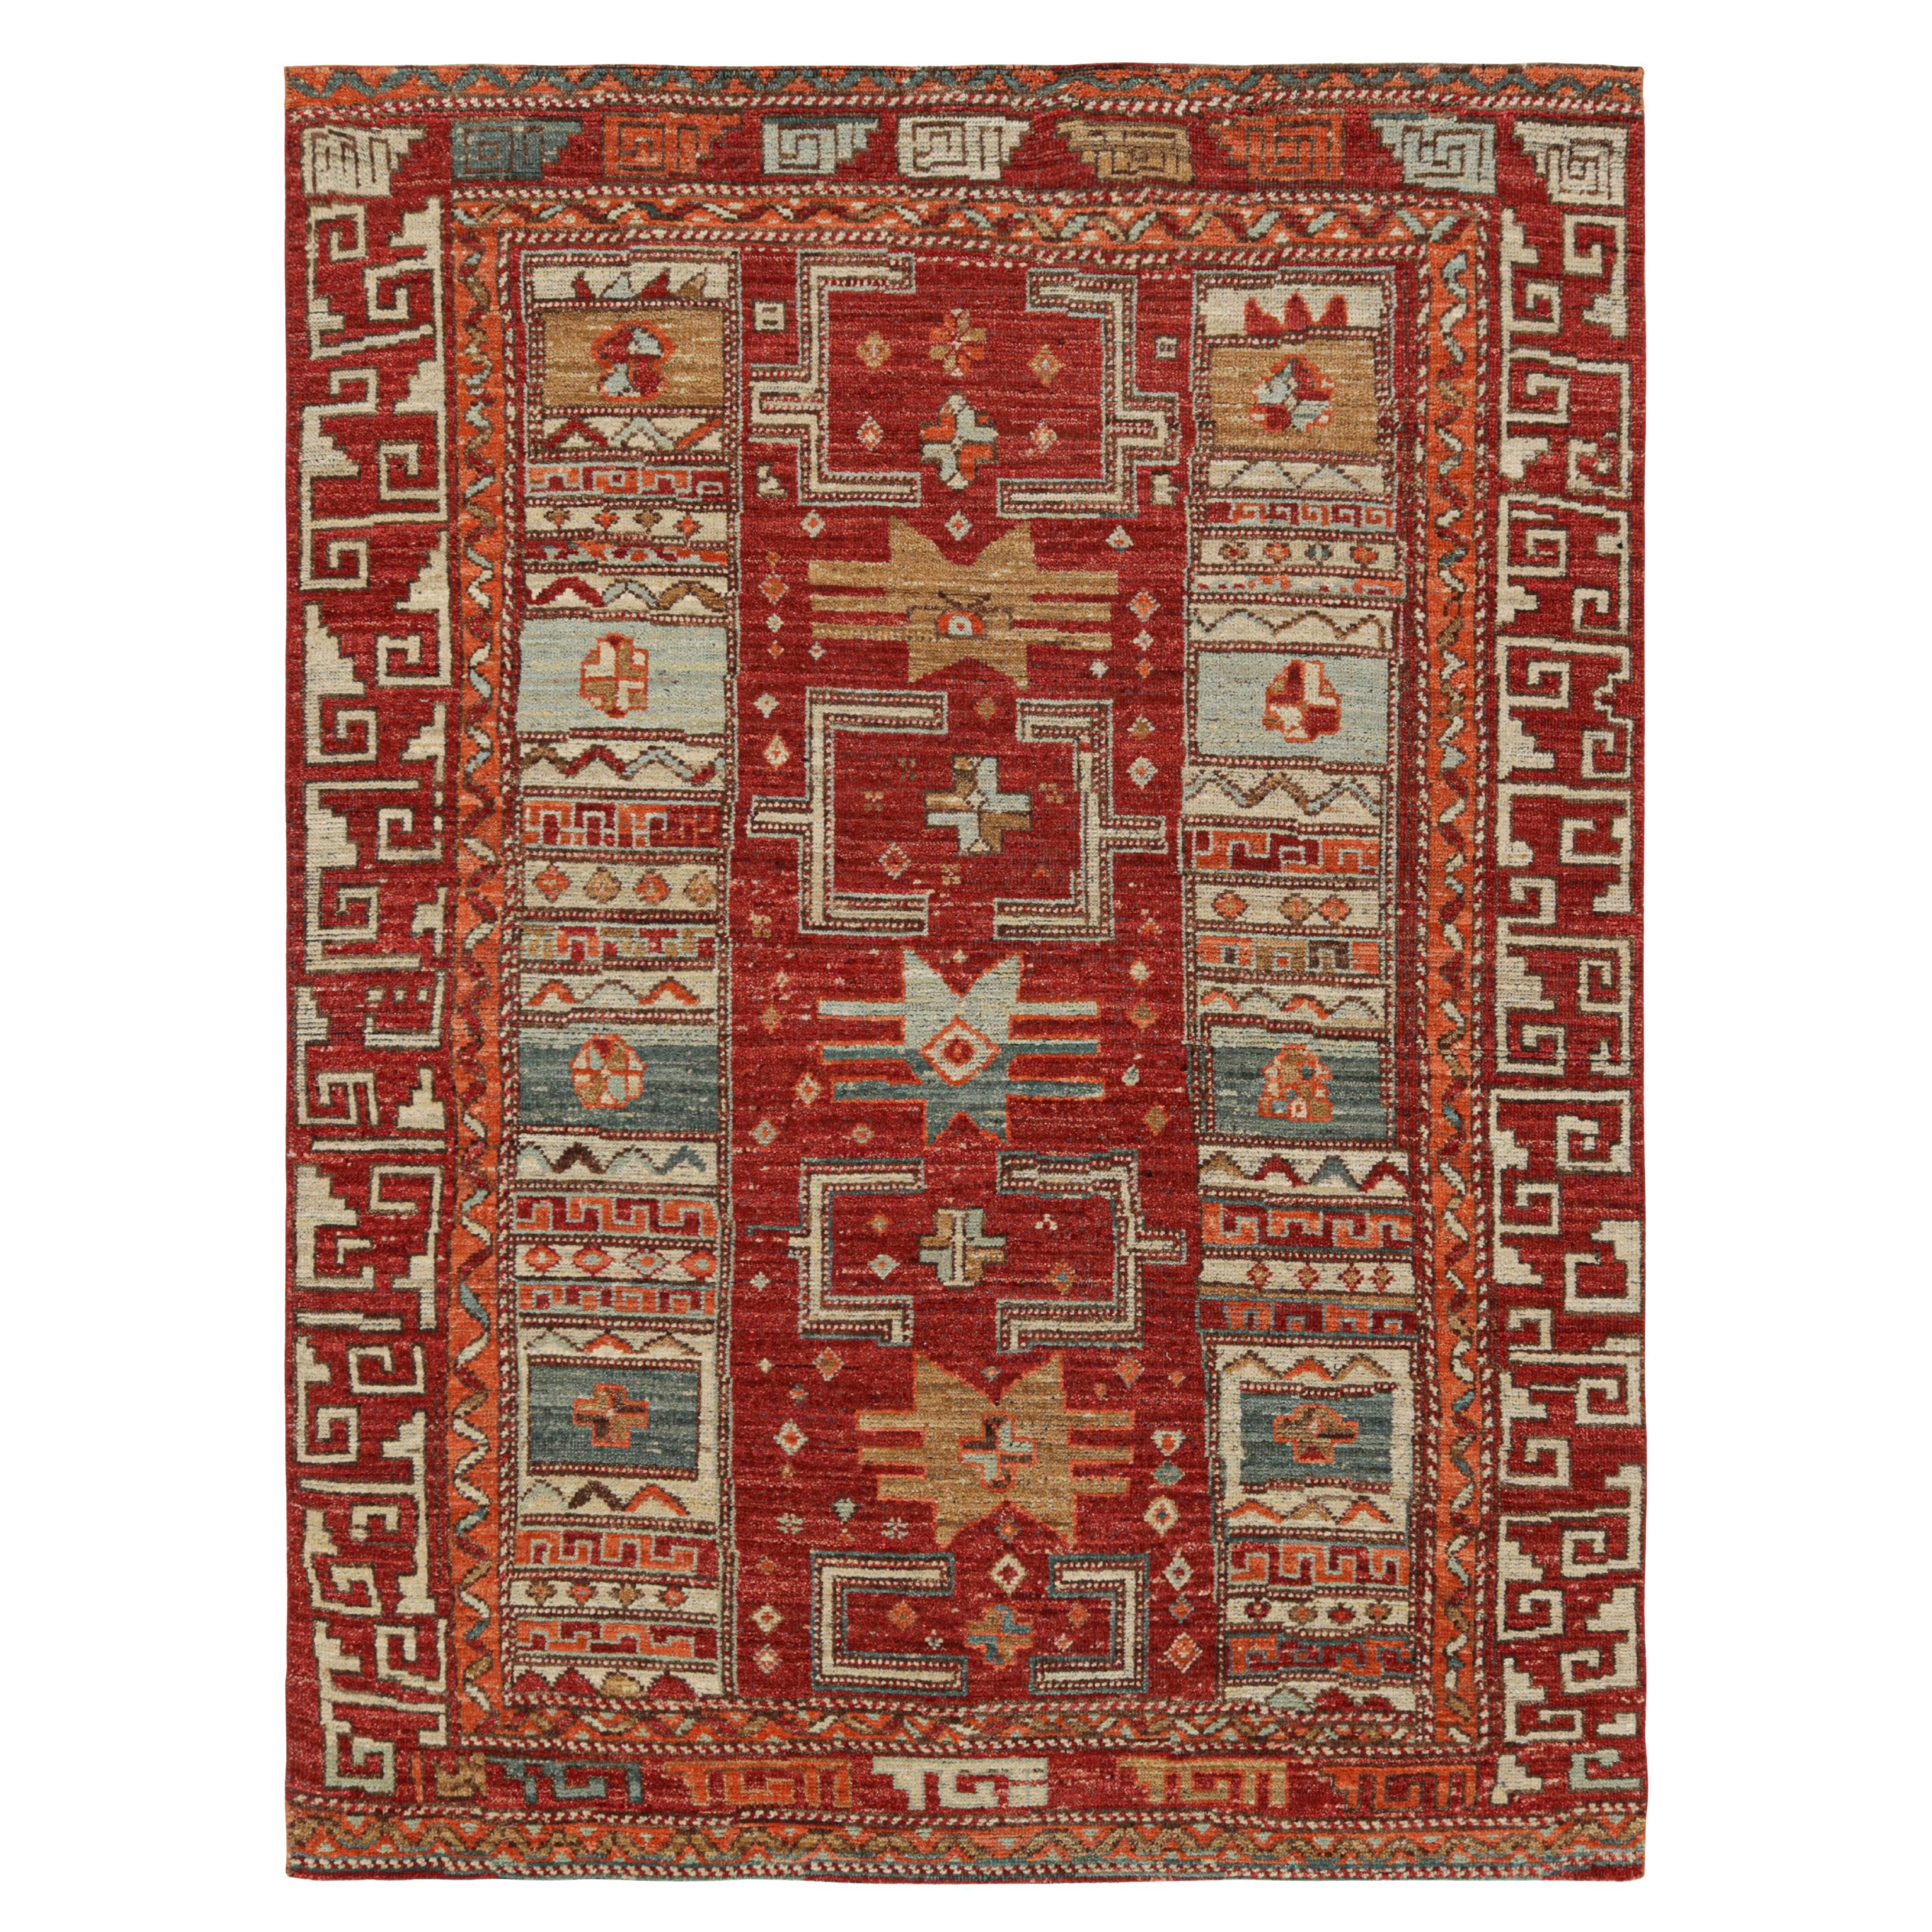 Rug & Kilim’s Tribal Rug in Rich Red, with Colorful Geometric Patterns For Sale